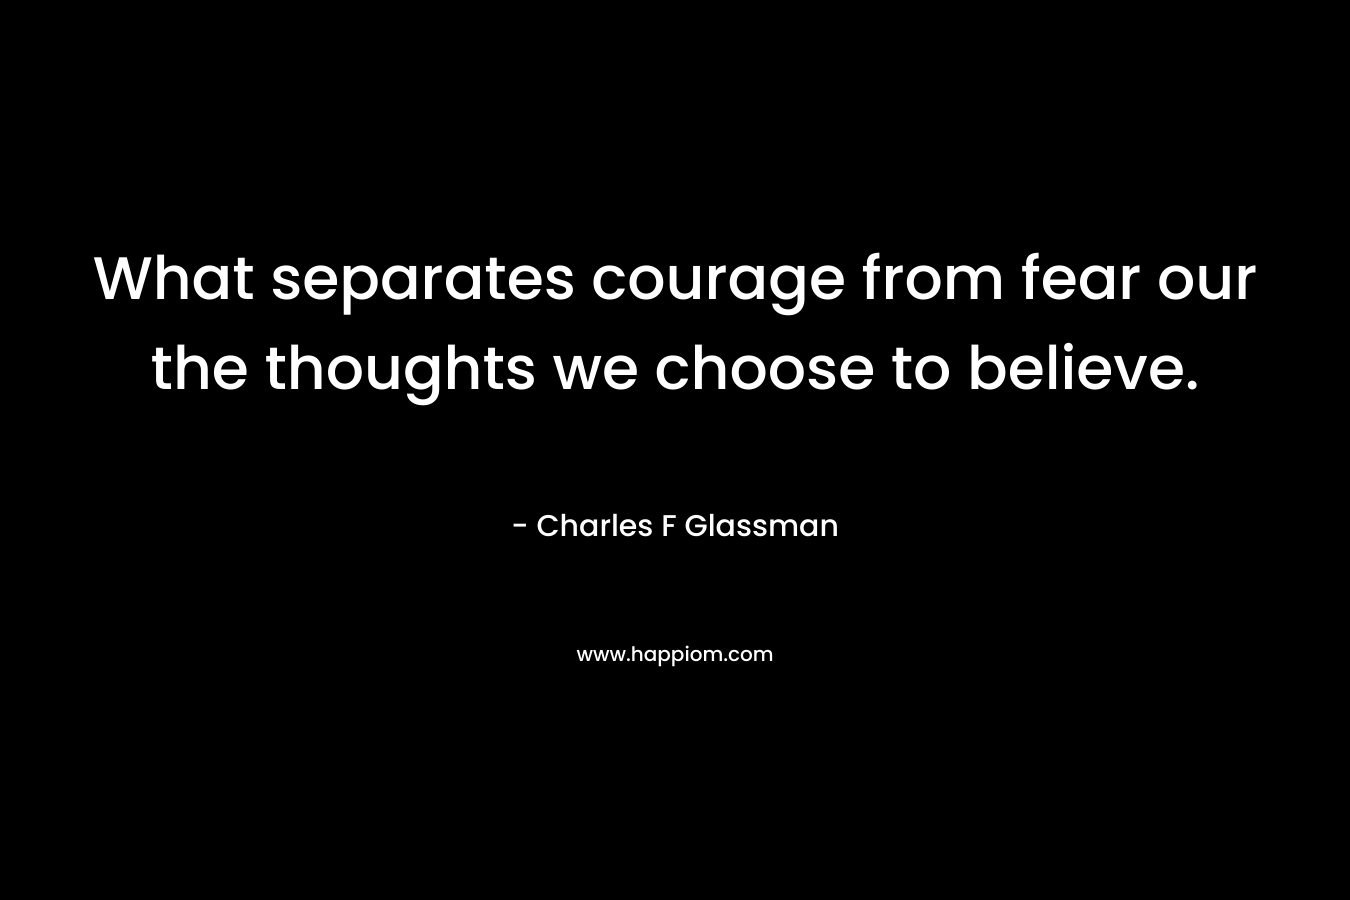 What separates courage from fear our the thoughts we choose to believe.